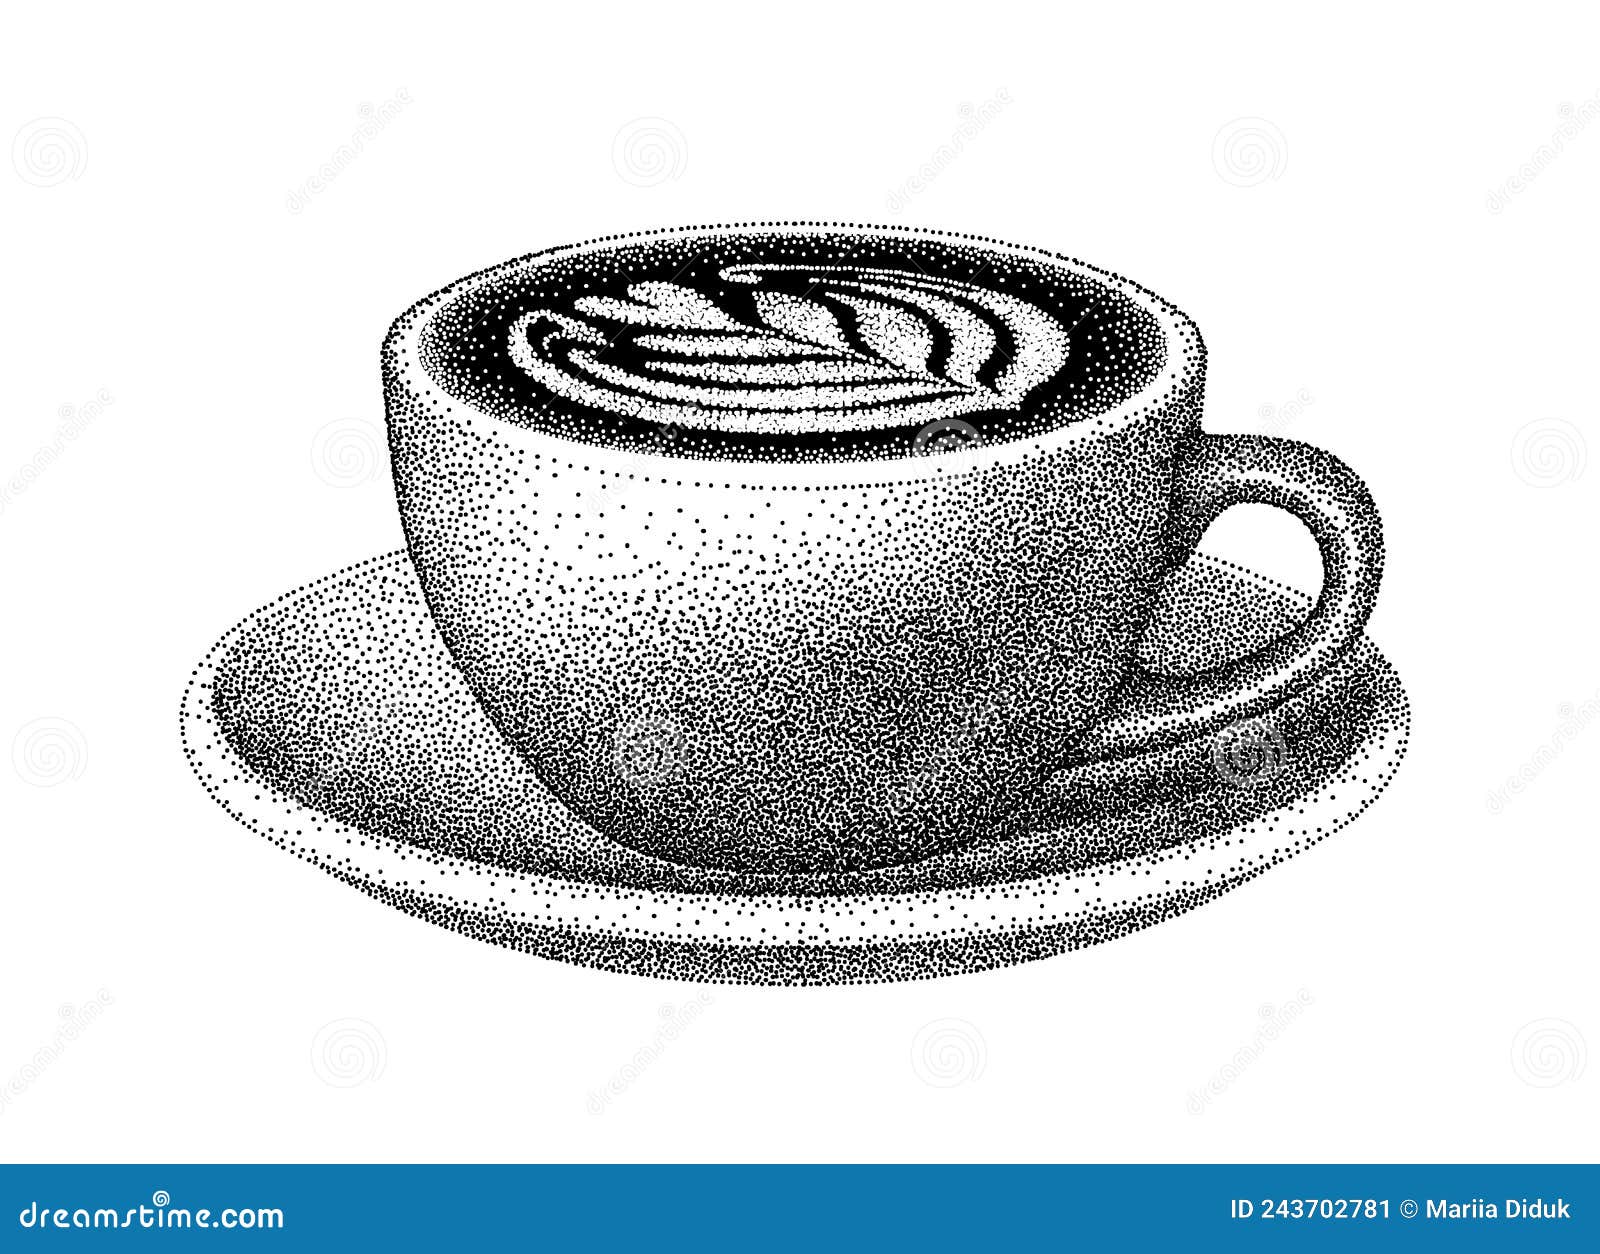 Draw a coffee cup with shading | Coffee cup drawing, Mug drawing, Shadow  drawing